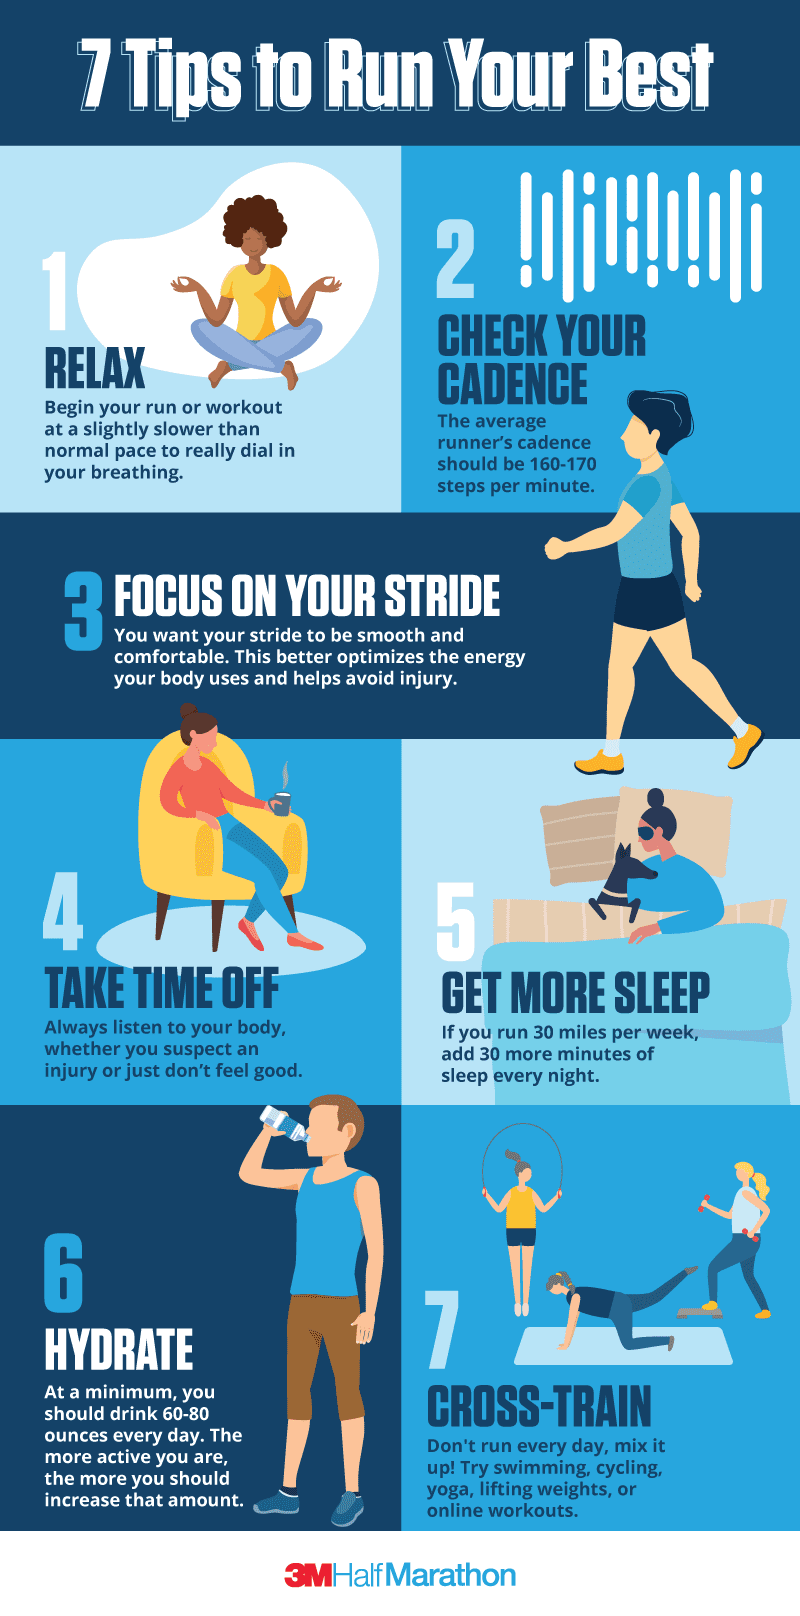 Downloadable infographic highlighting 7 tips you should follow to run your best.